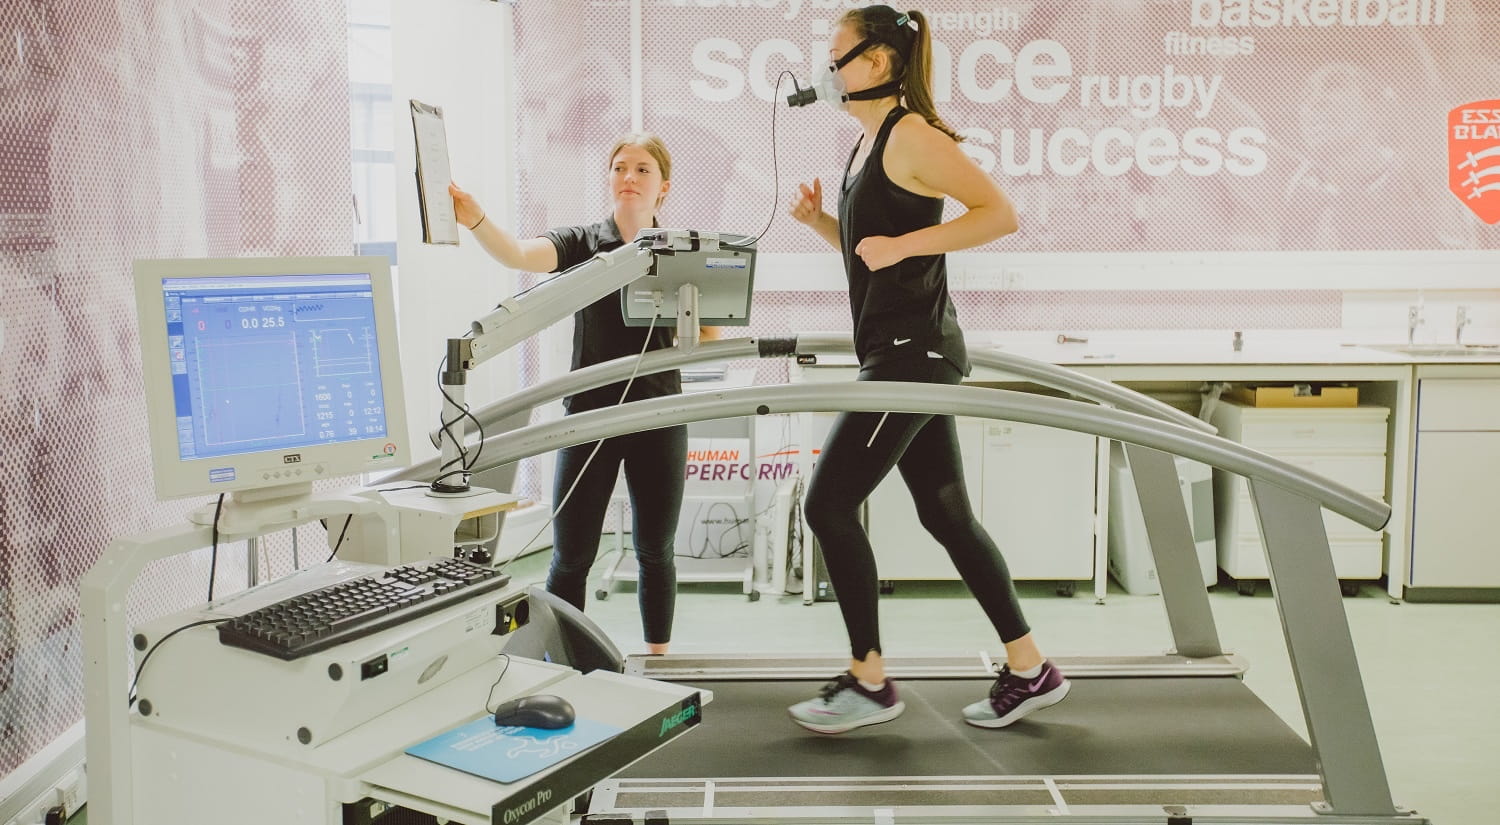 Woman running on treadmill in the sports arena lab